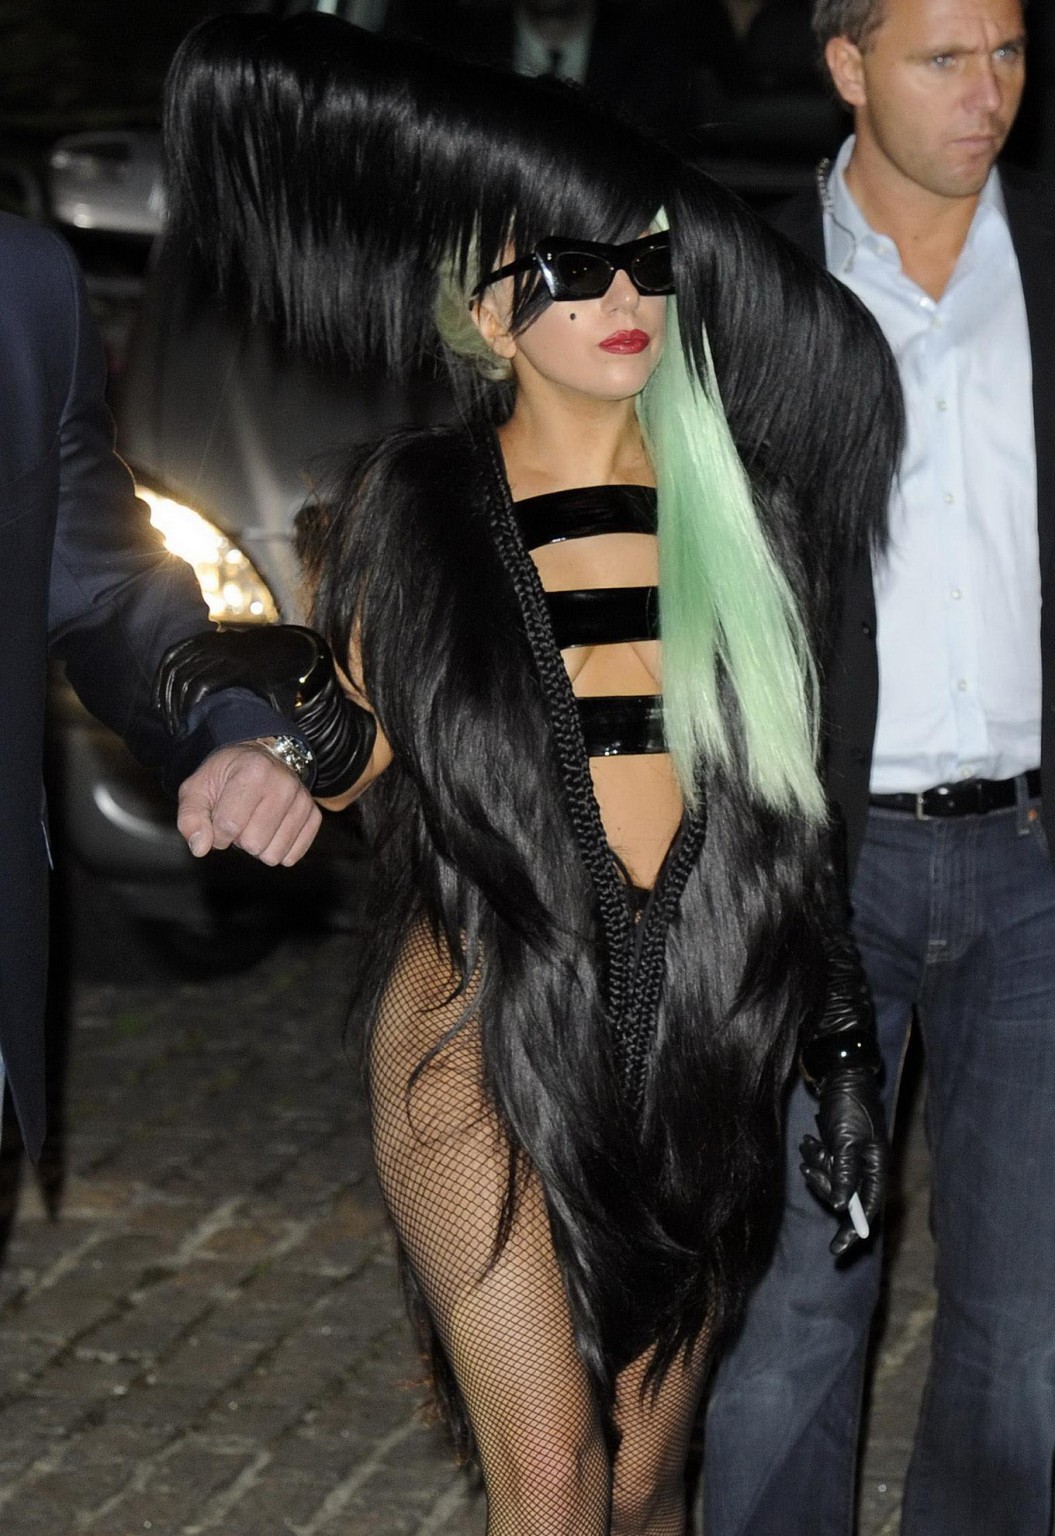 Lady Gaga sighting in London wearing skimpy outfit #75286118